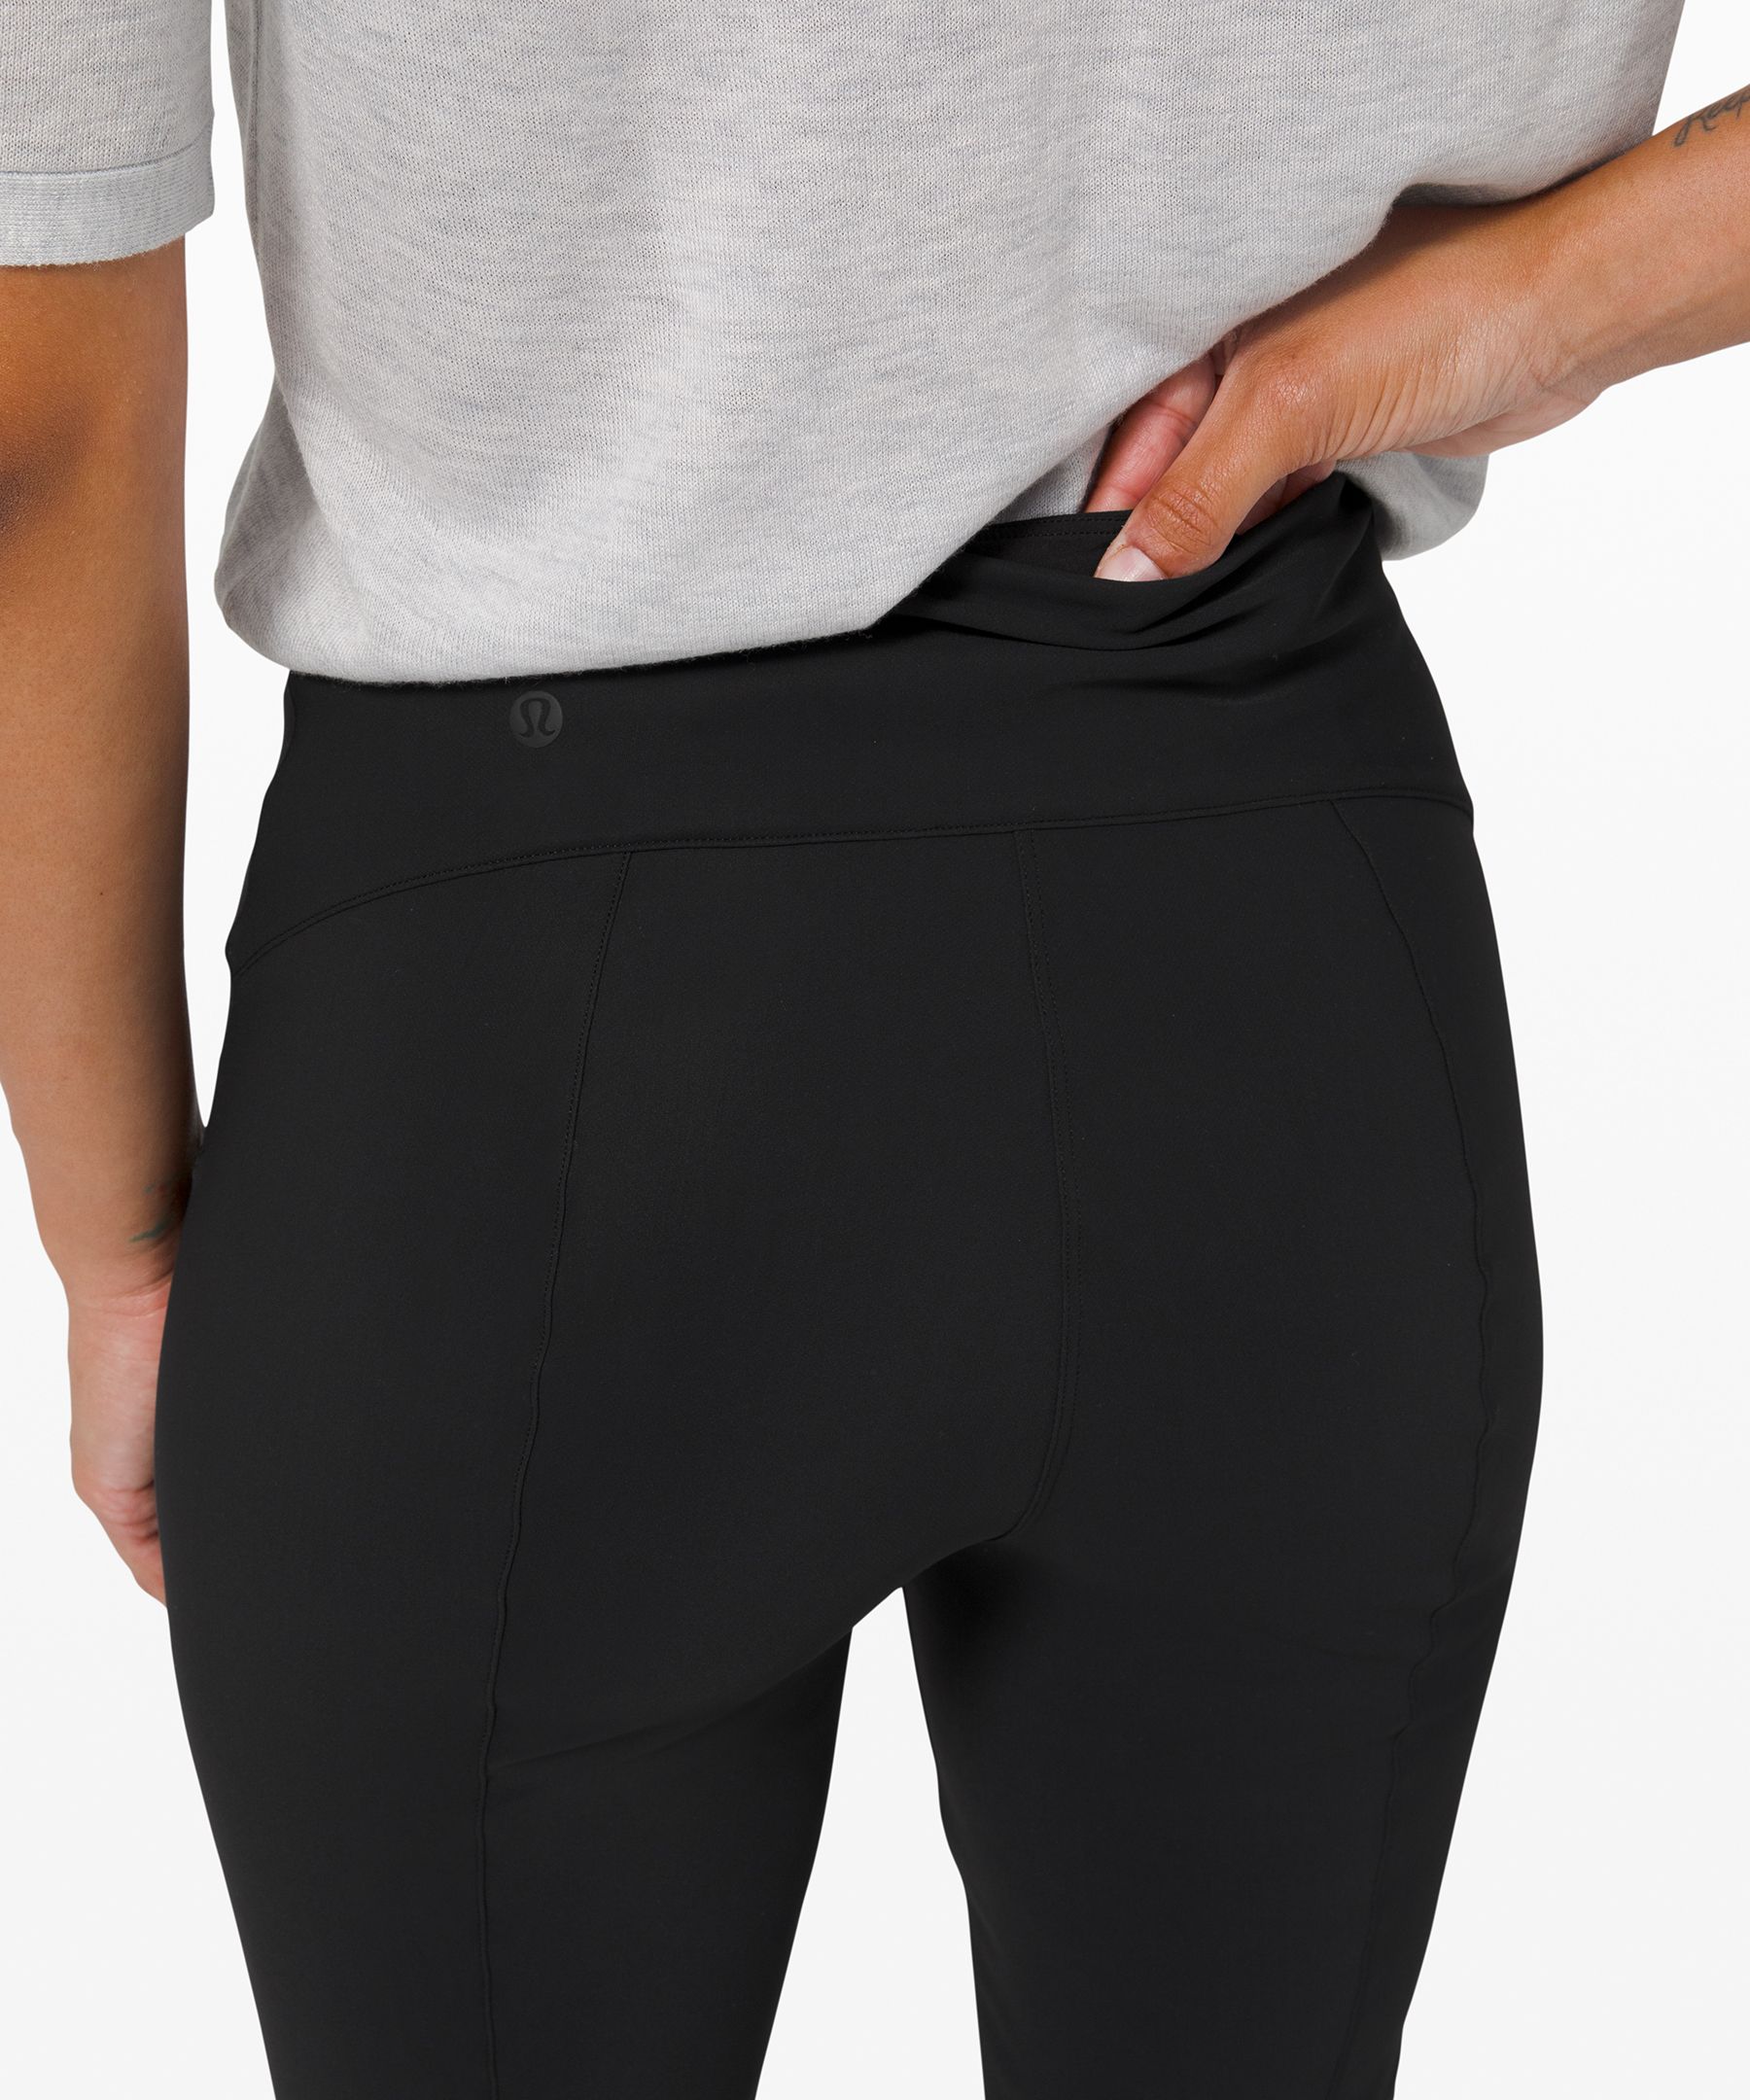 Lululemon Here to There High-Rise Crop - Crosshatch Texture Black